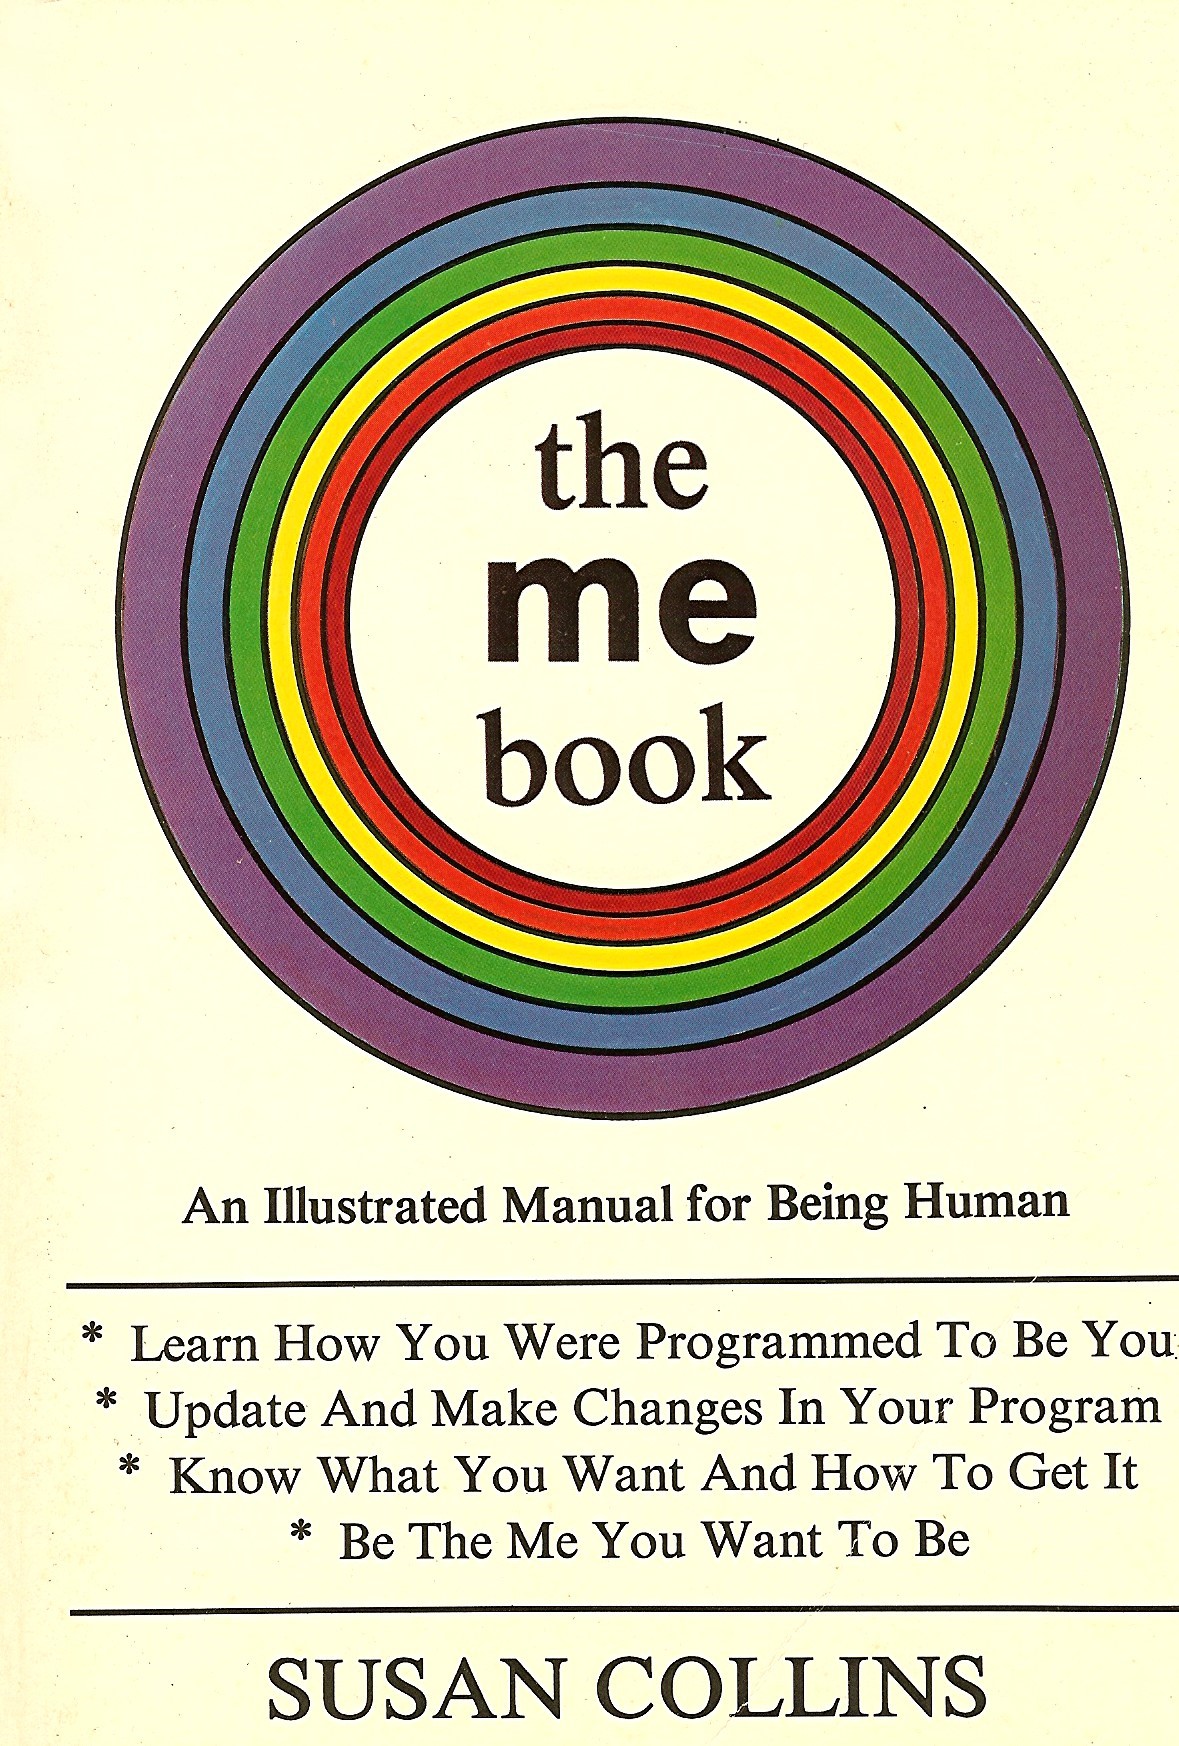 Copy of The Me Book by Susan Ford Collins